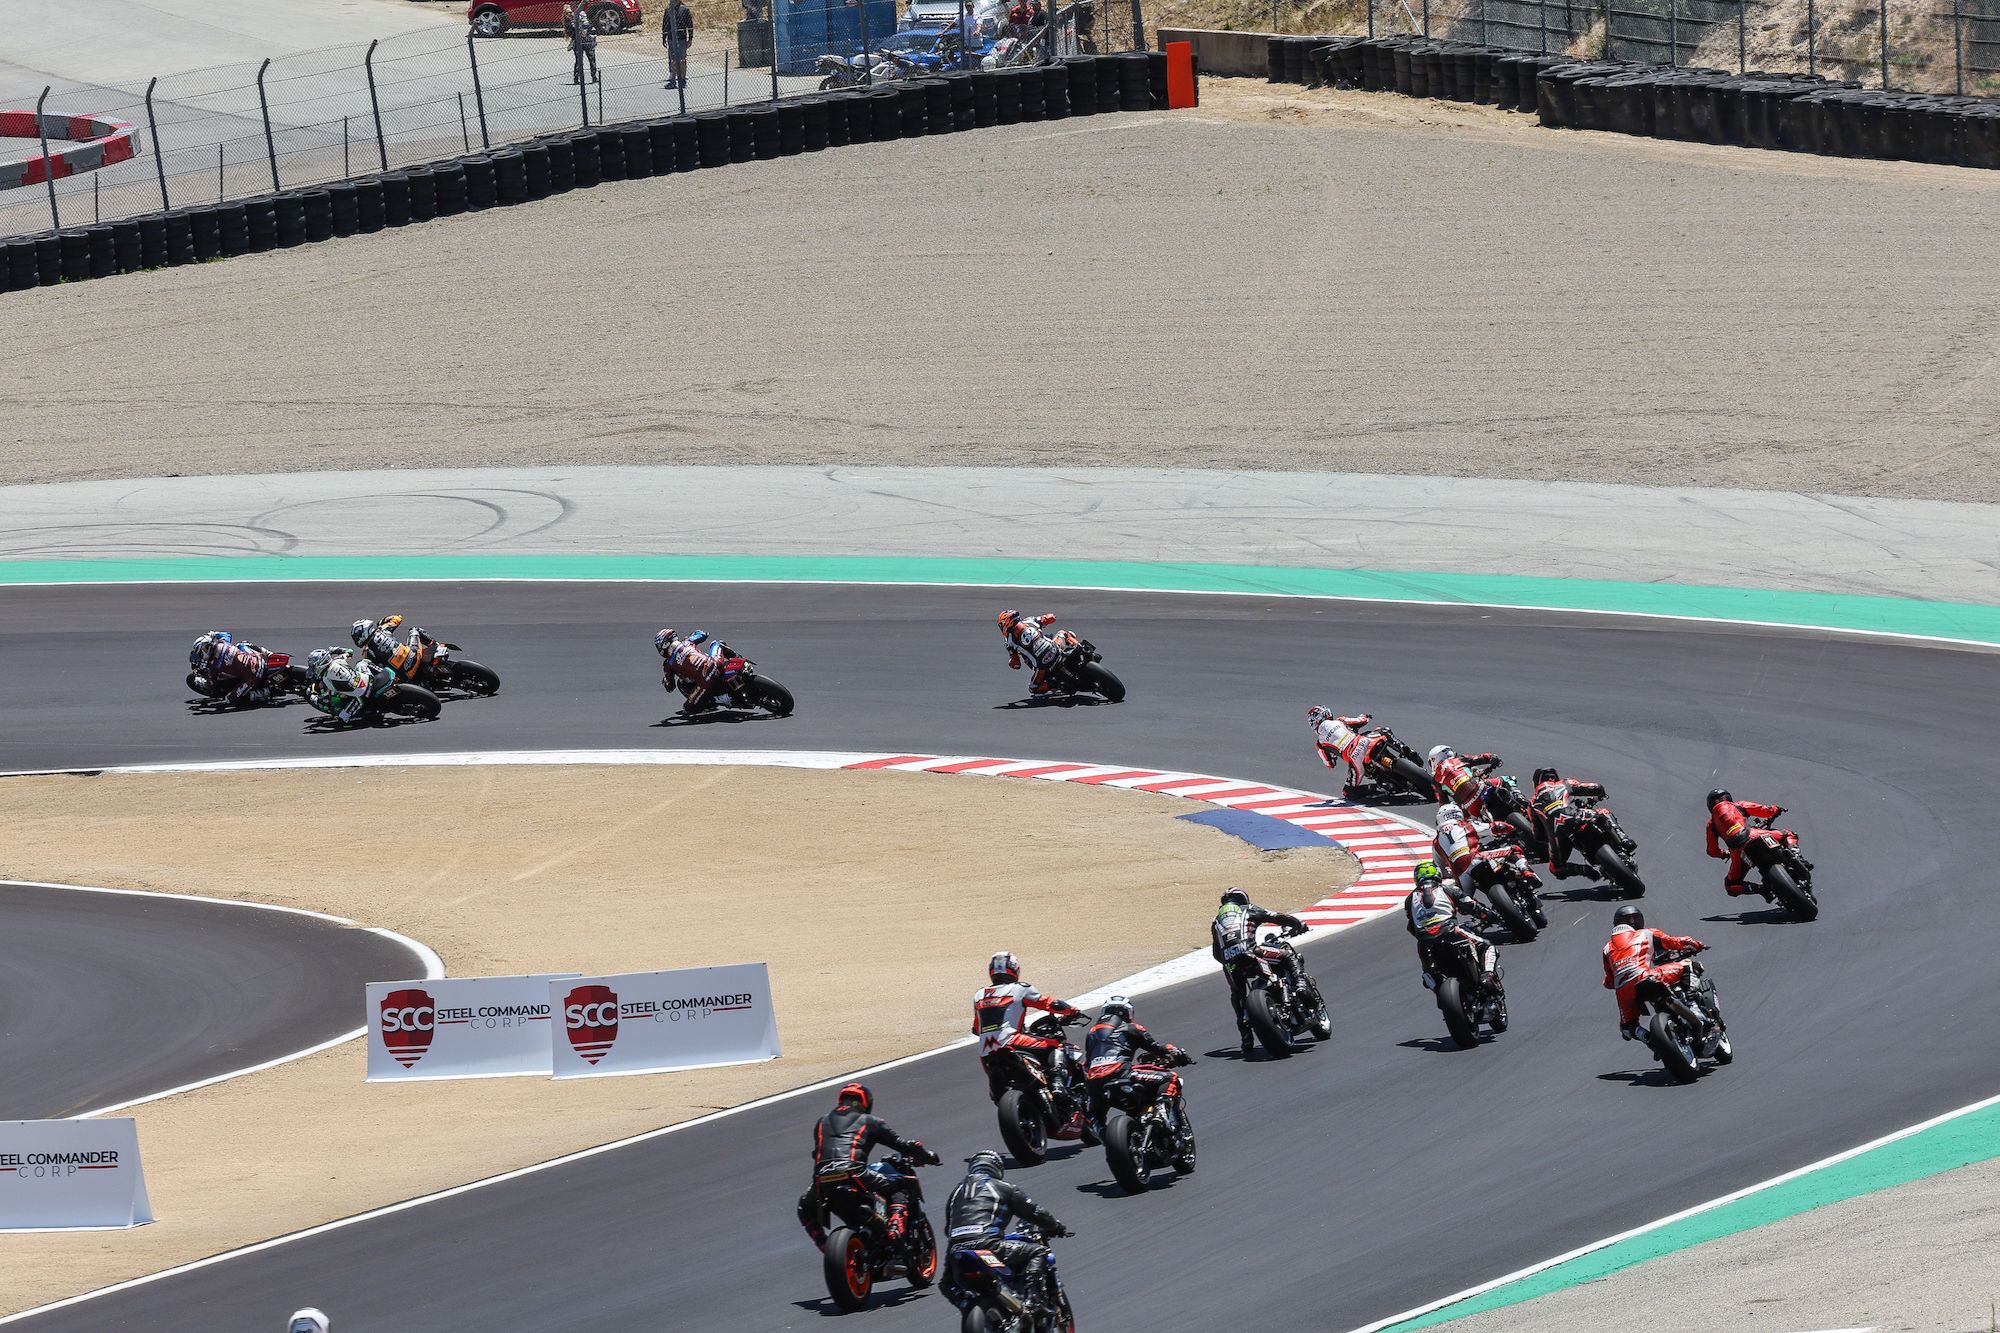 A view of Energica's Eva Ribelle RS taking the lead at this past Round One of Super Hooligans (Laguna Seca). Media sourced from Energica's recent press release.